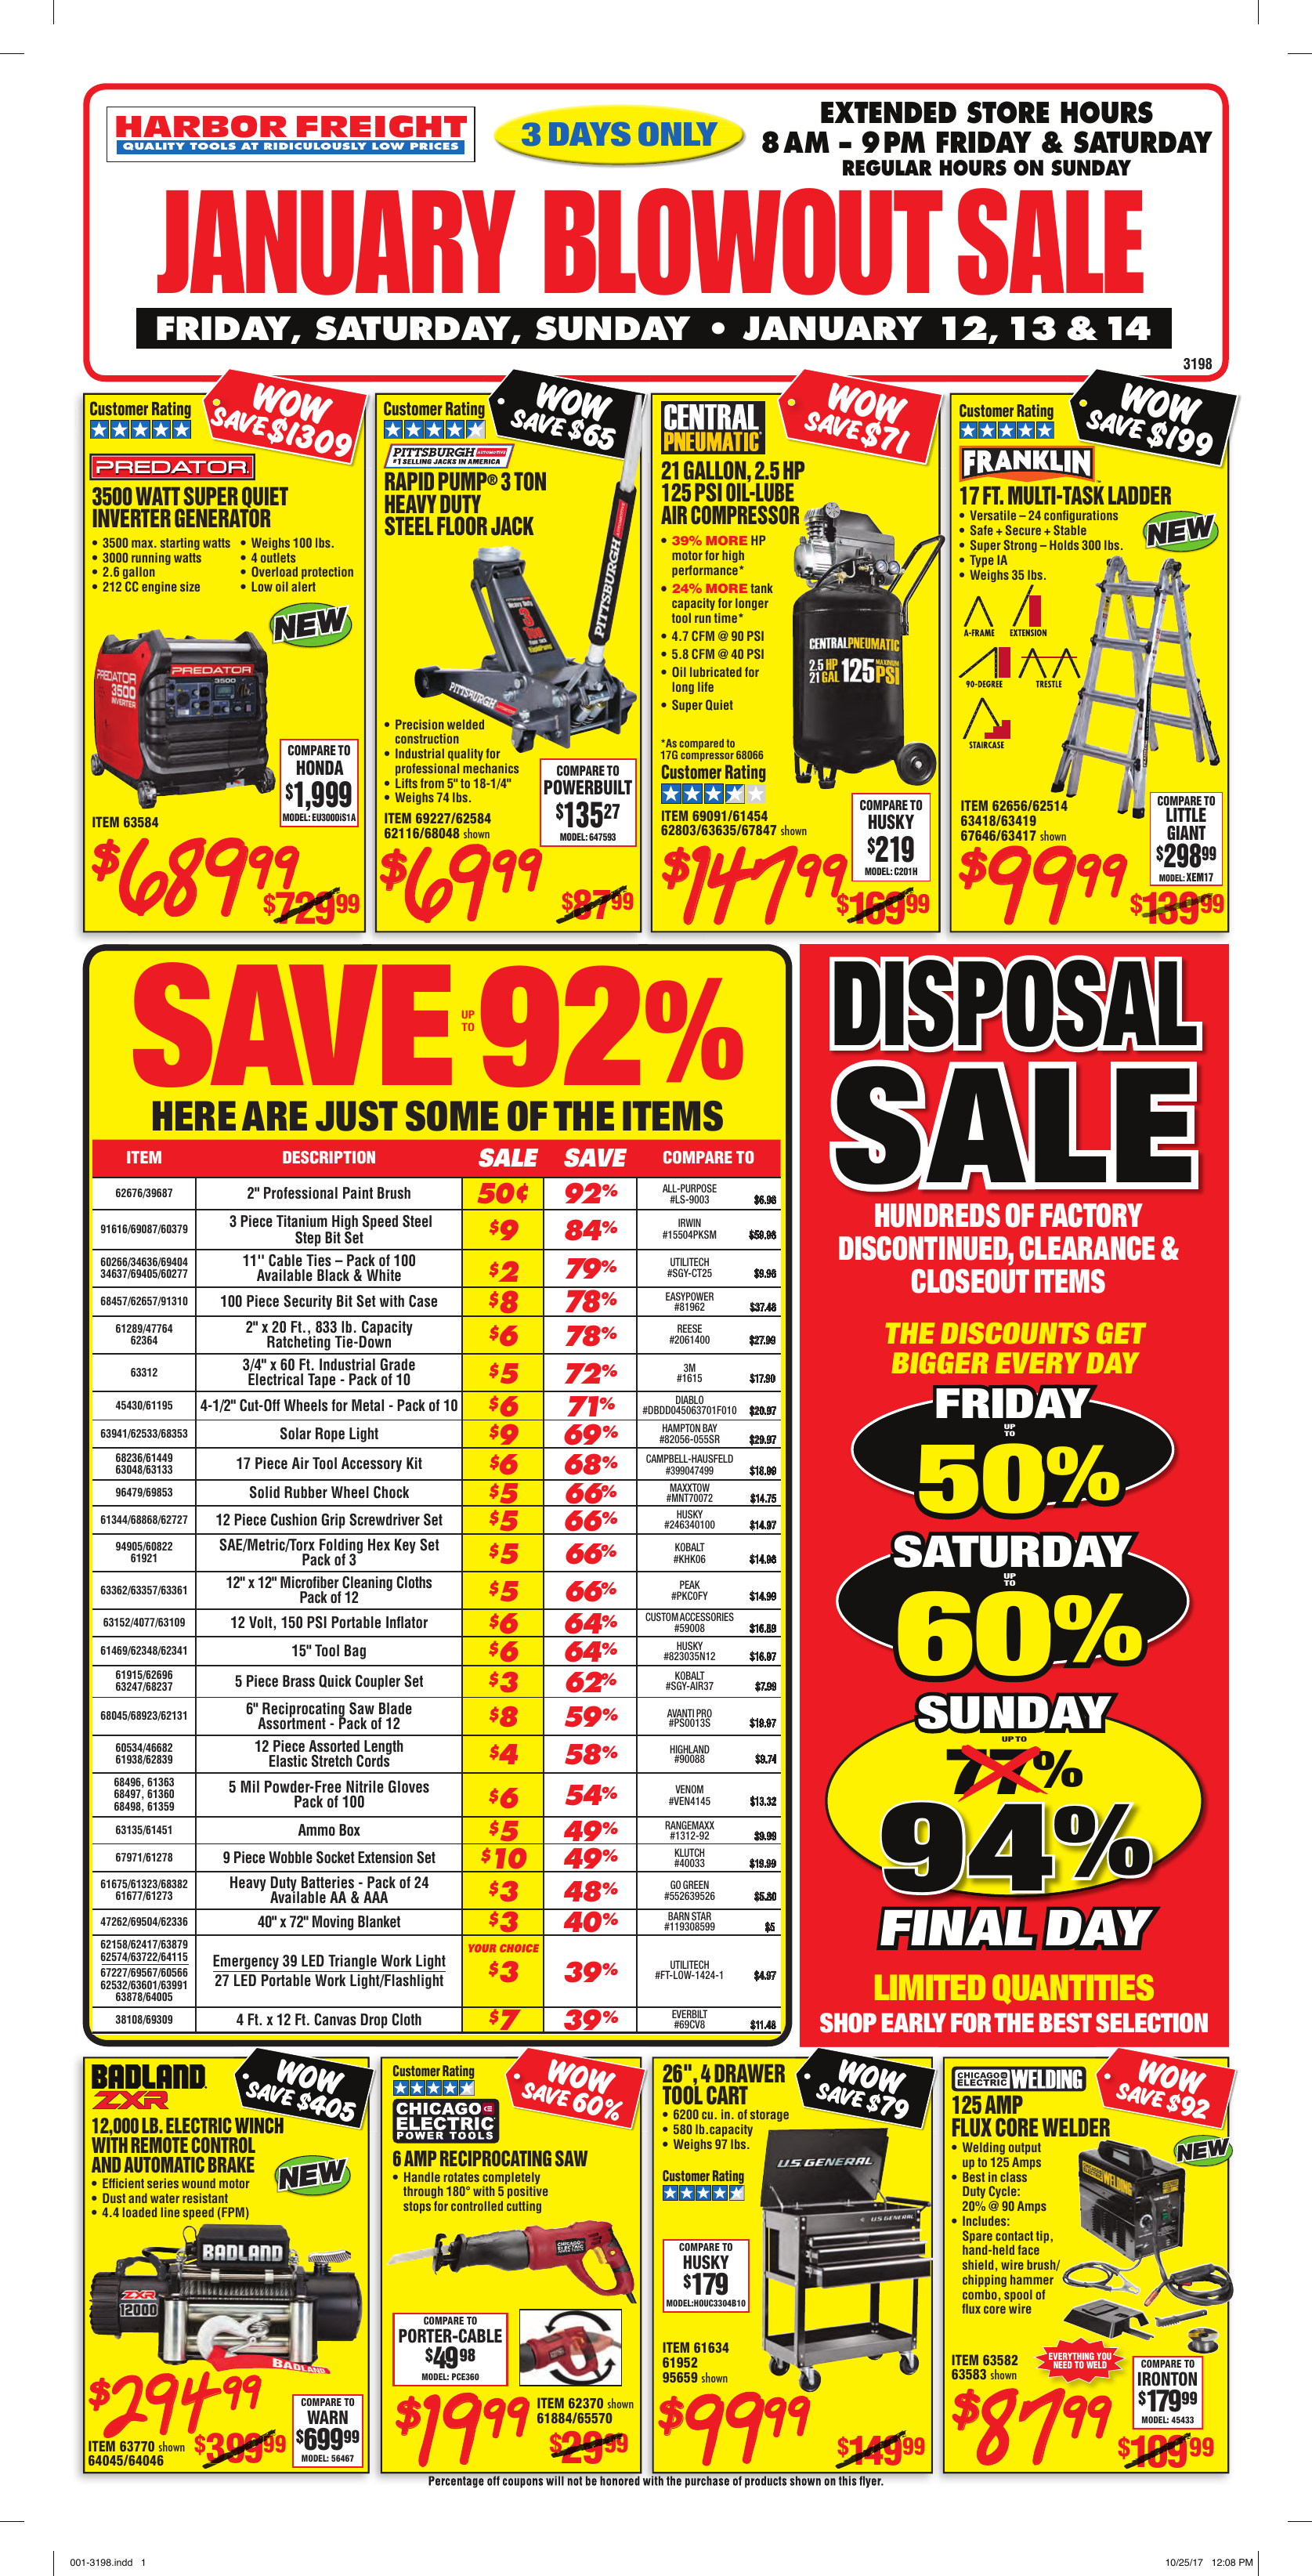 Page 1 of 4 - 001-3198 Jan-Blowout-Sale